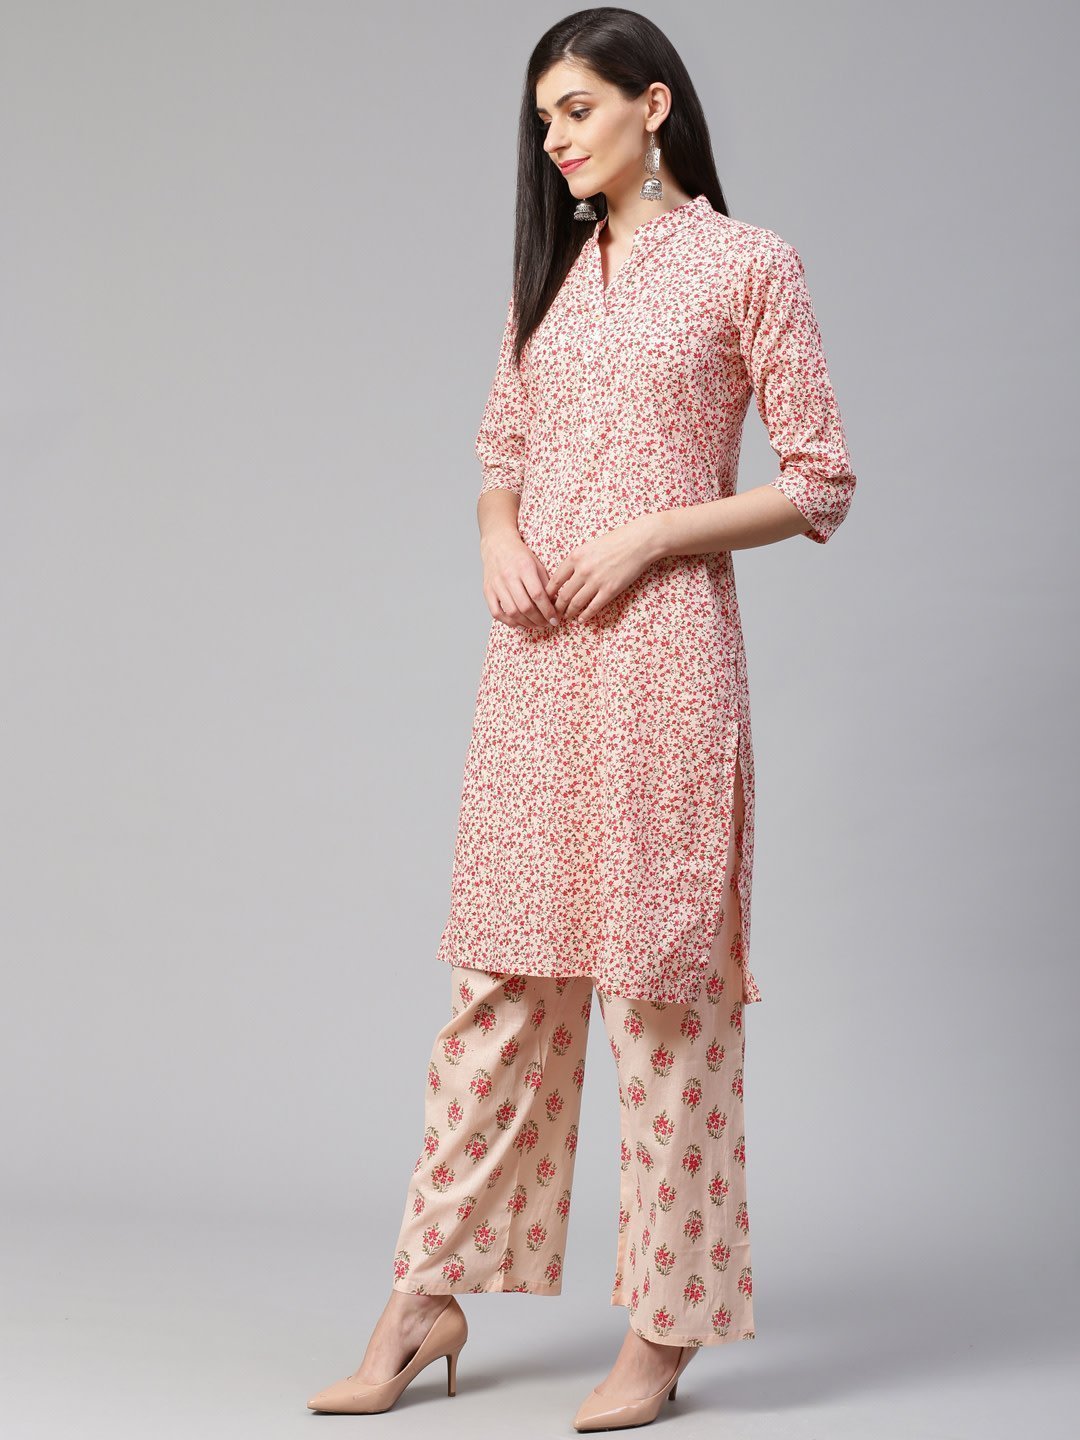 Women's Pink Floral Printed Kurta with Palazzos - Jompers